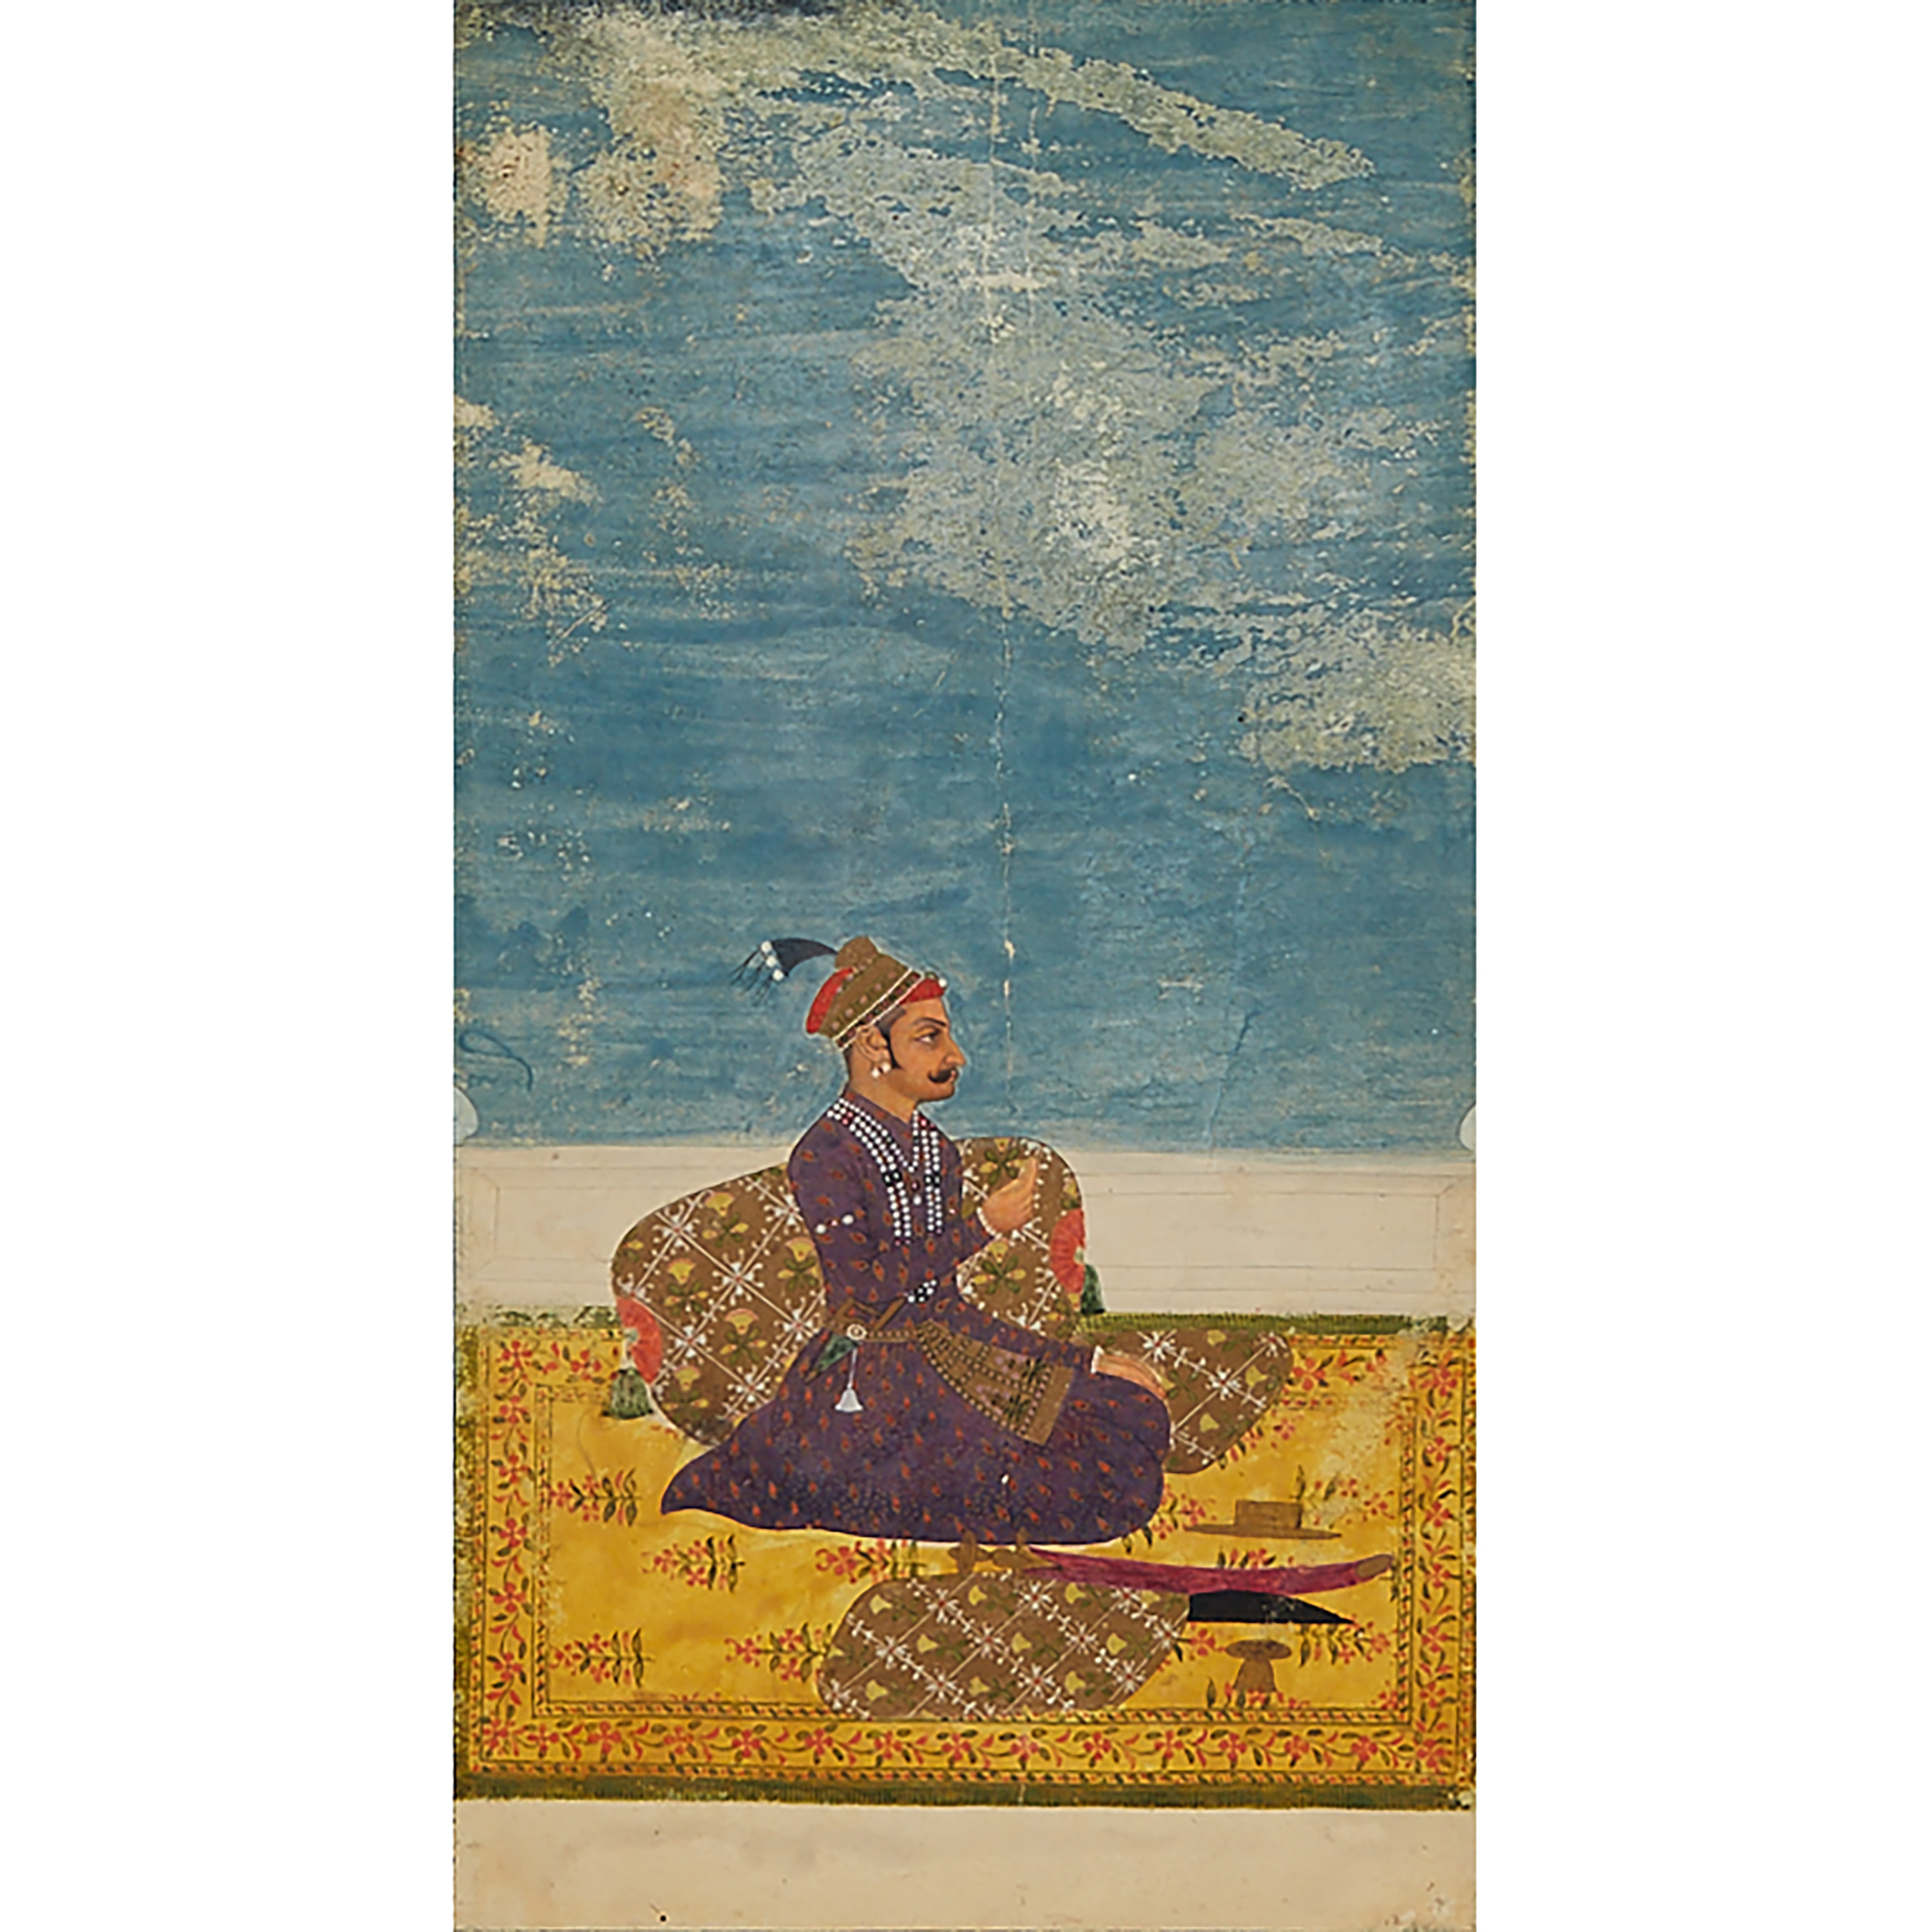 Punjab Hills School, A Prince Seated on a Yellow Carpet, 18th Century